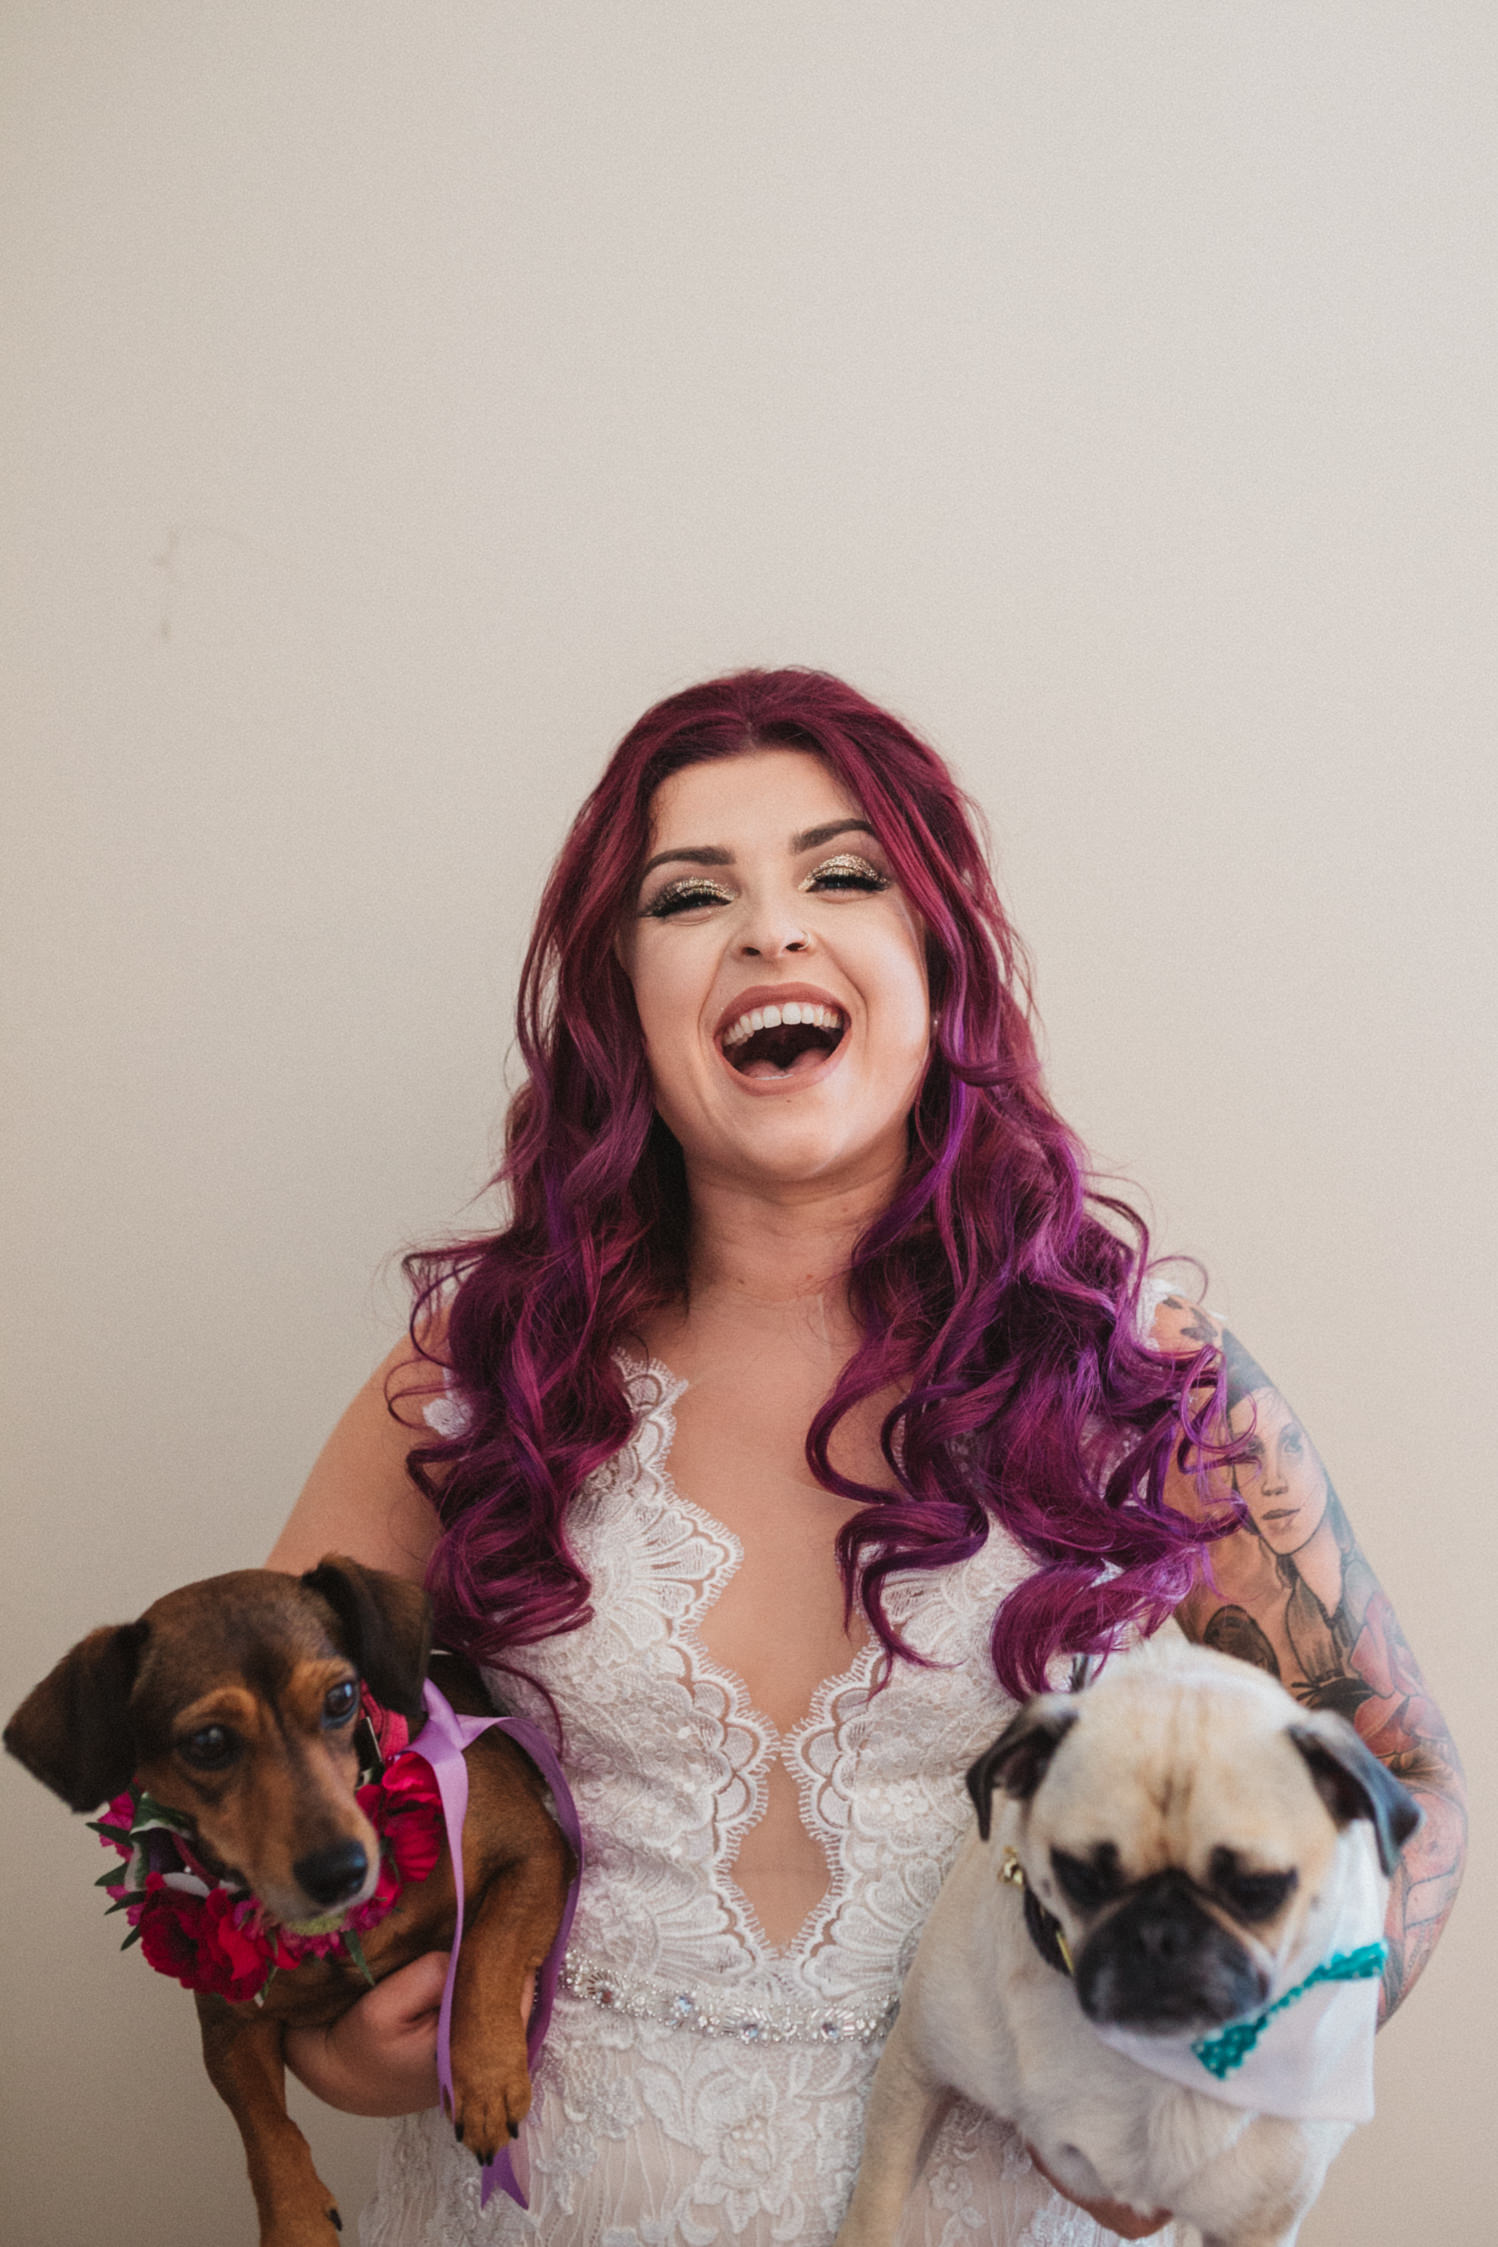 helen anderson purple haired bride in her wedding dress holding dogs